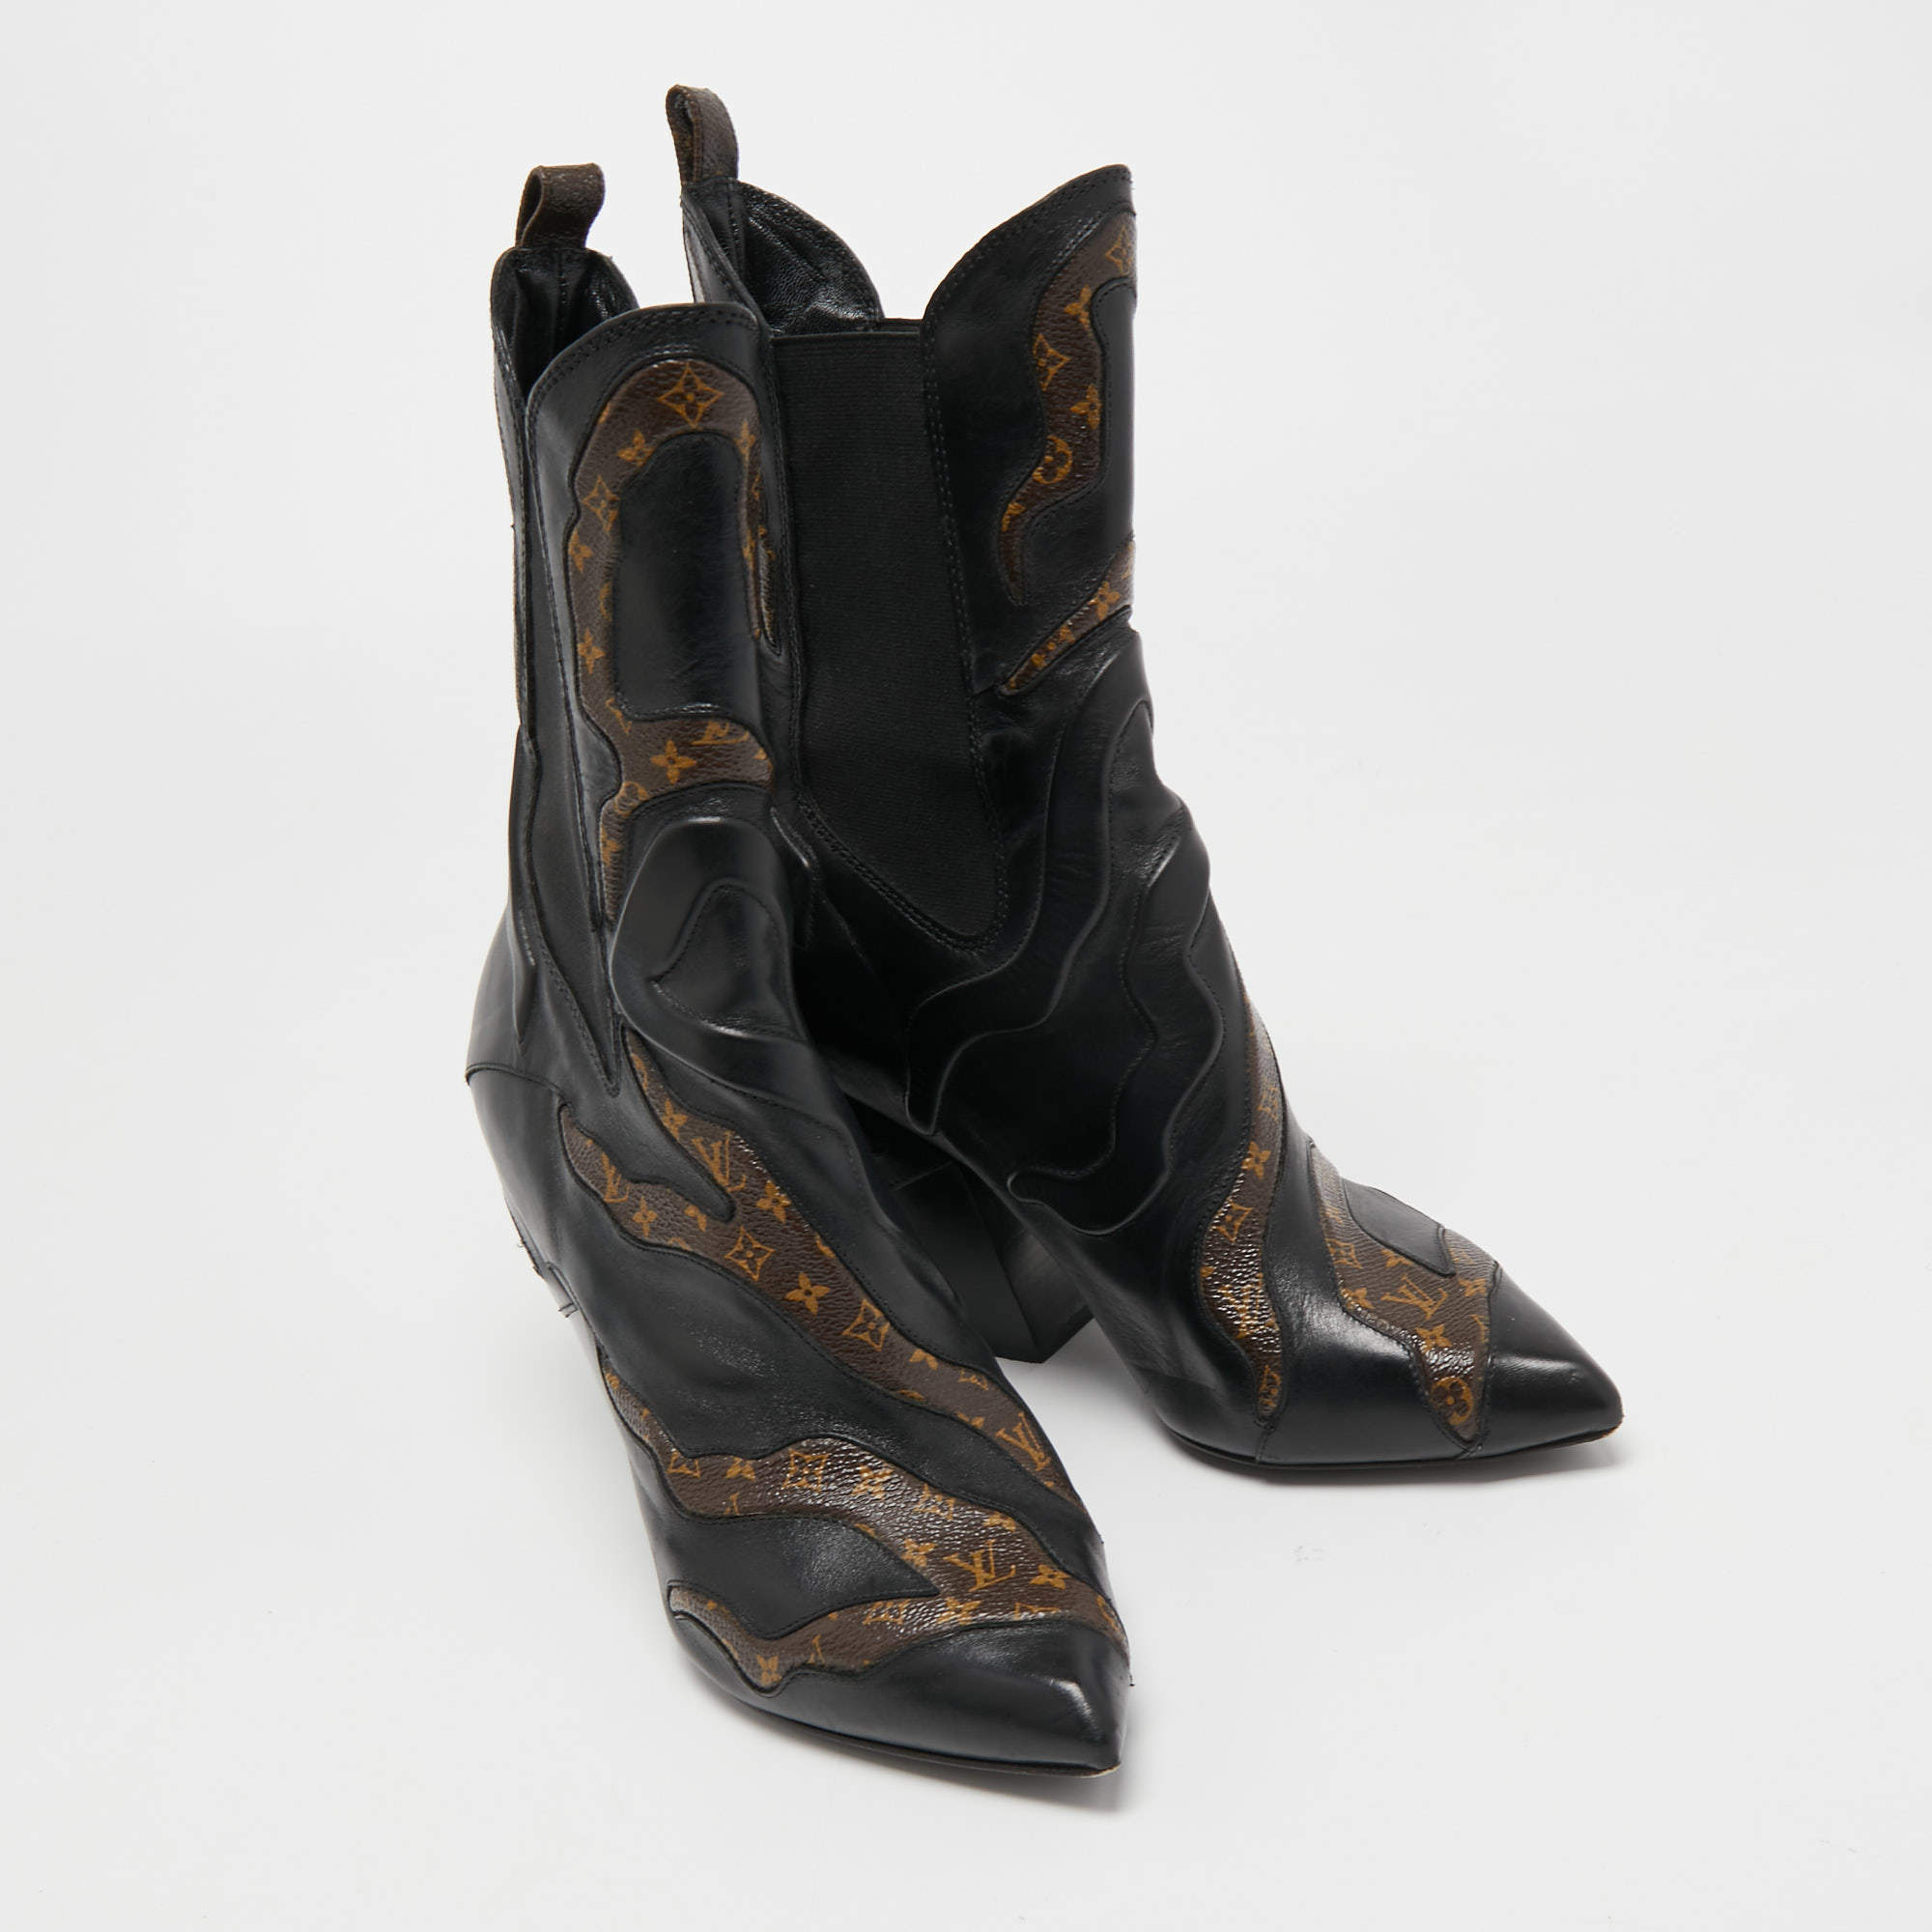 Louis Vuitton, Shoes, New Louis Vuitton Leather Fireball Western Boots  Size 38